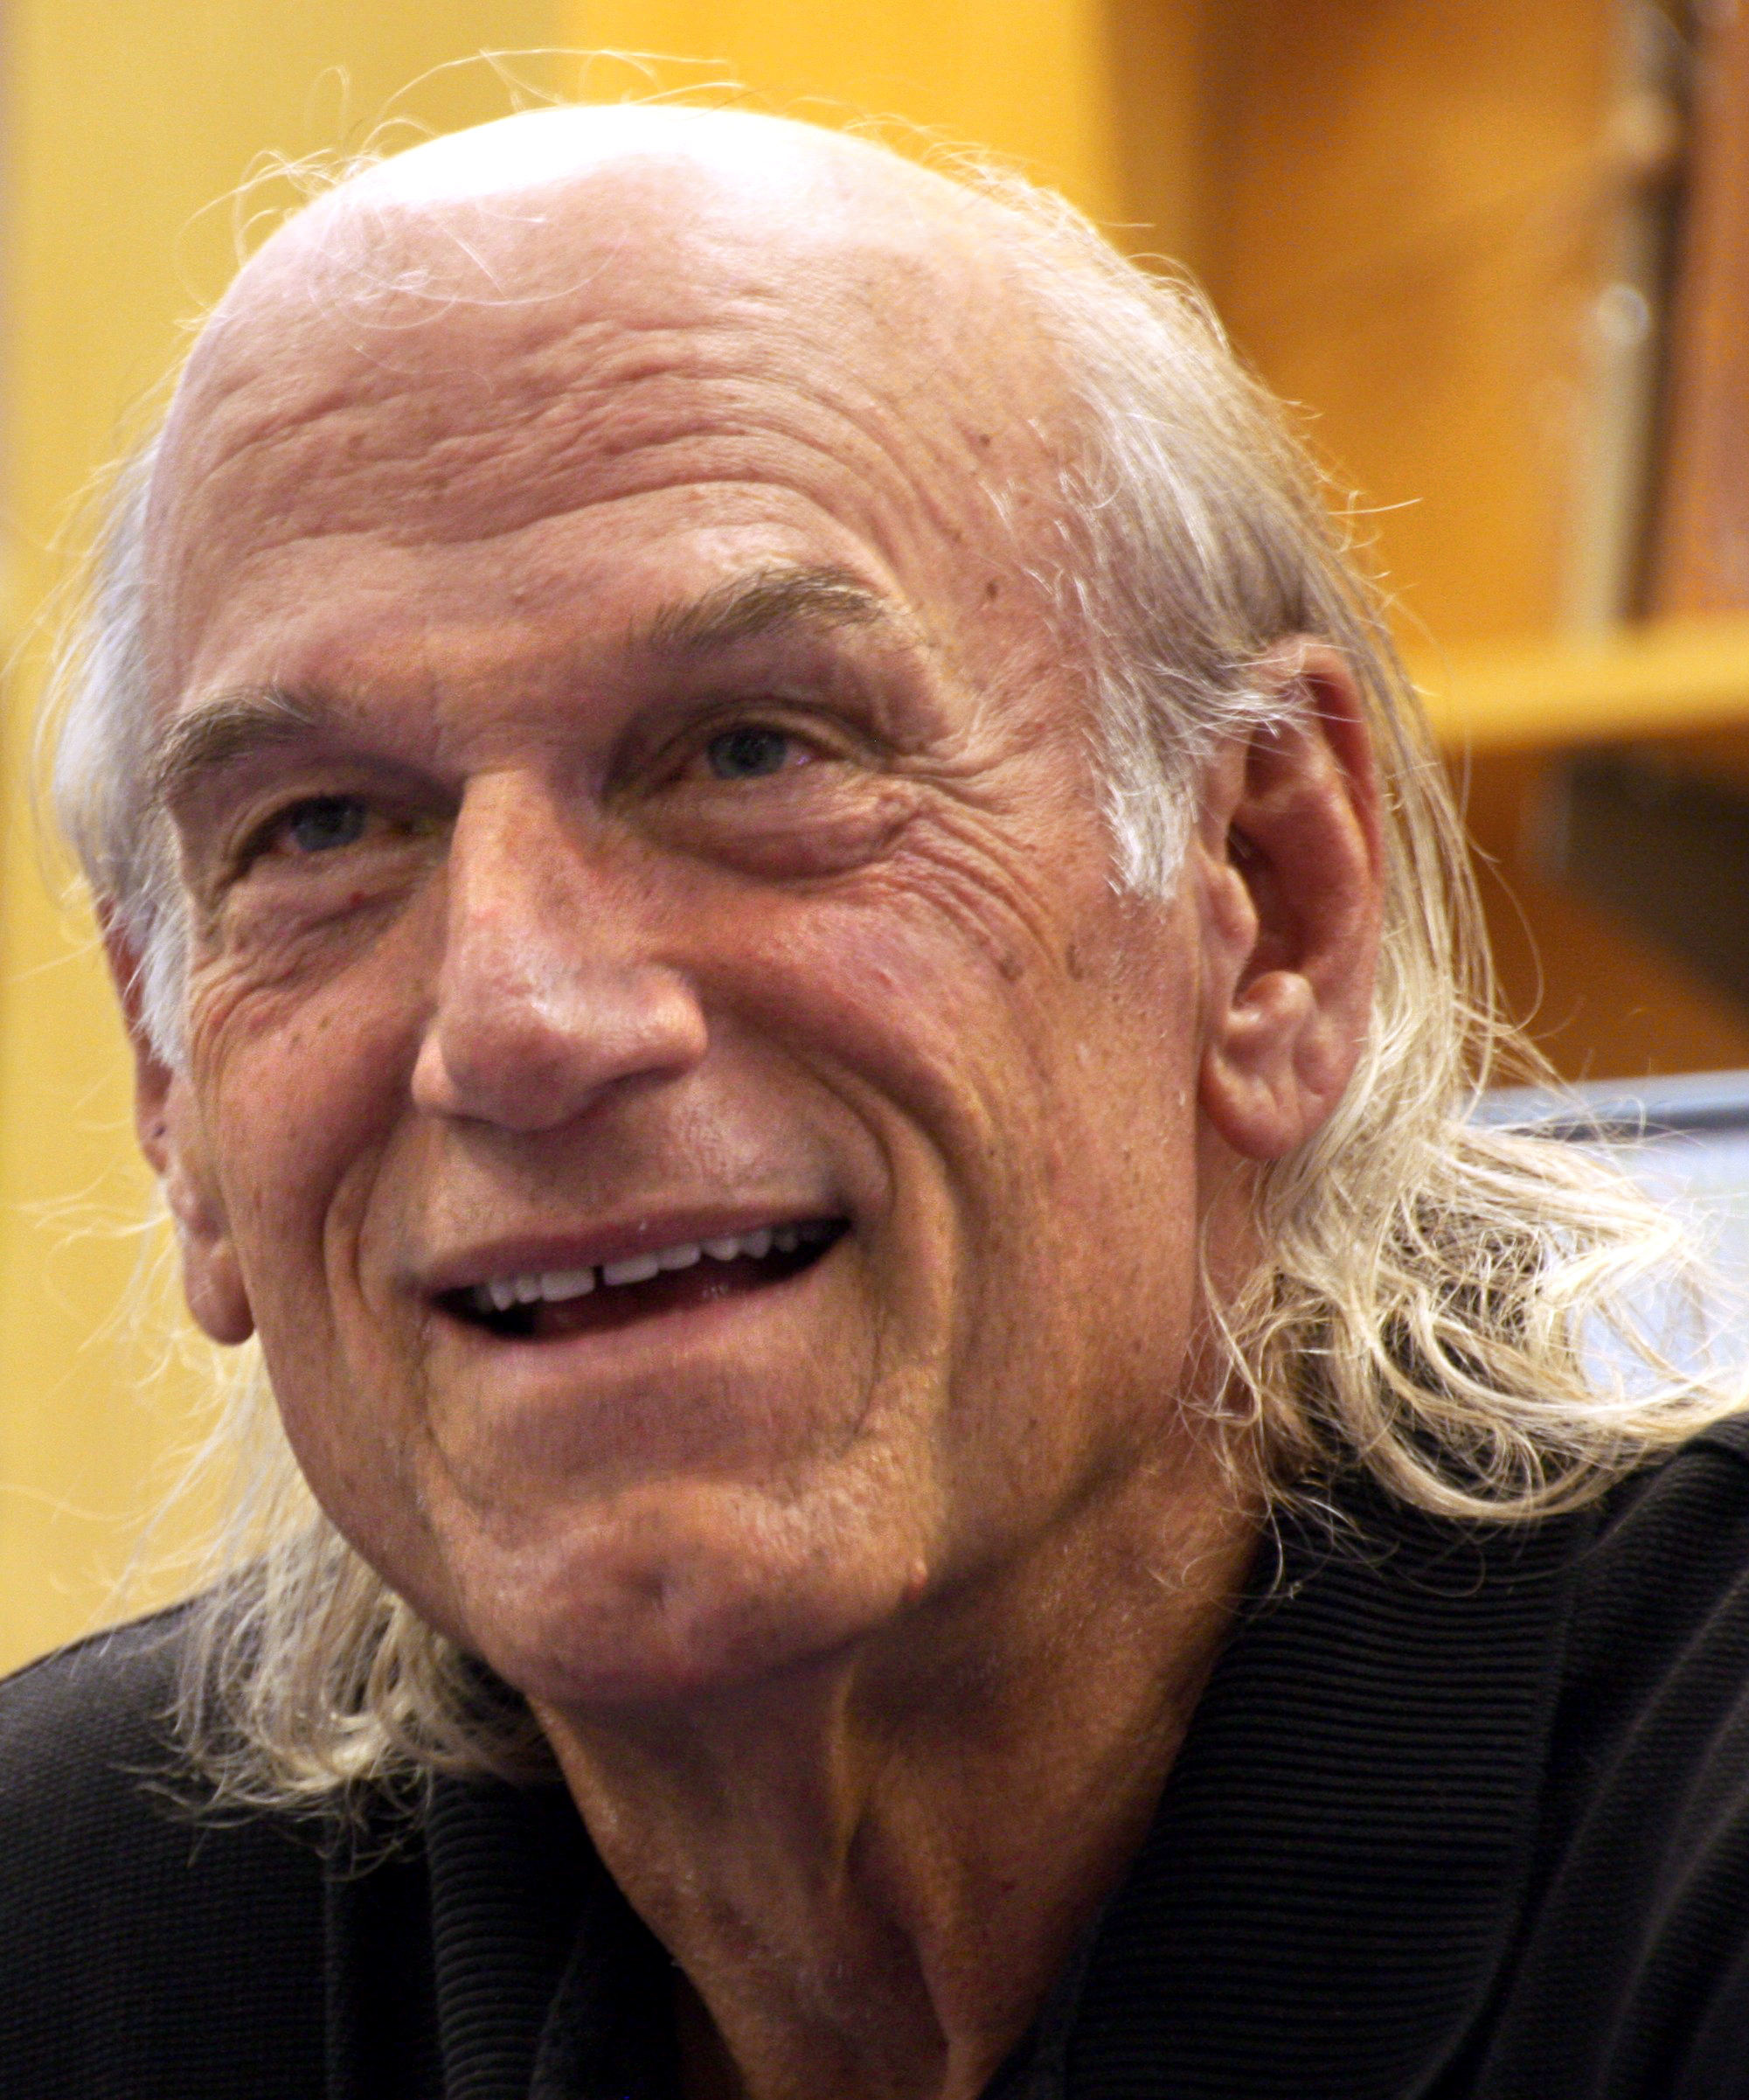 The 70-year old son of father (?) and mother(?) Jesse Ventura in 2022 photo. Jesse Ventura earned a  million dollar salary - leaving the net worth at  million in 2022